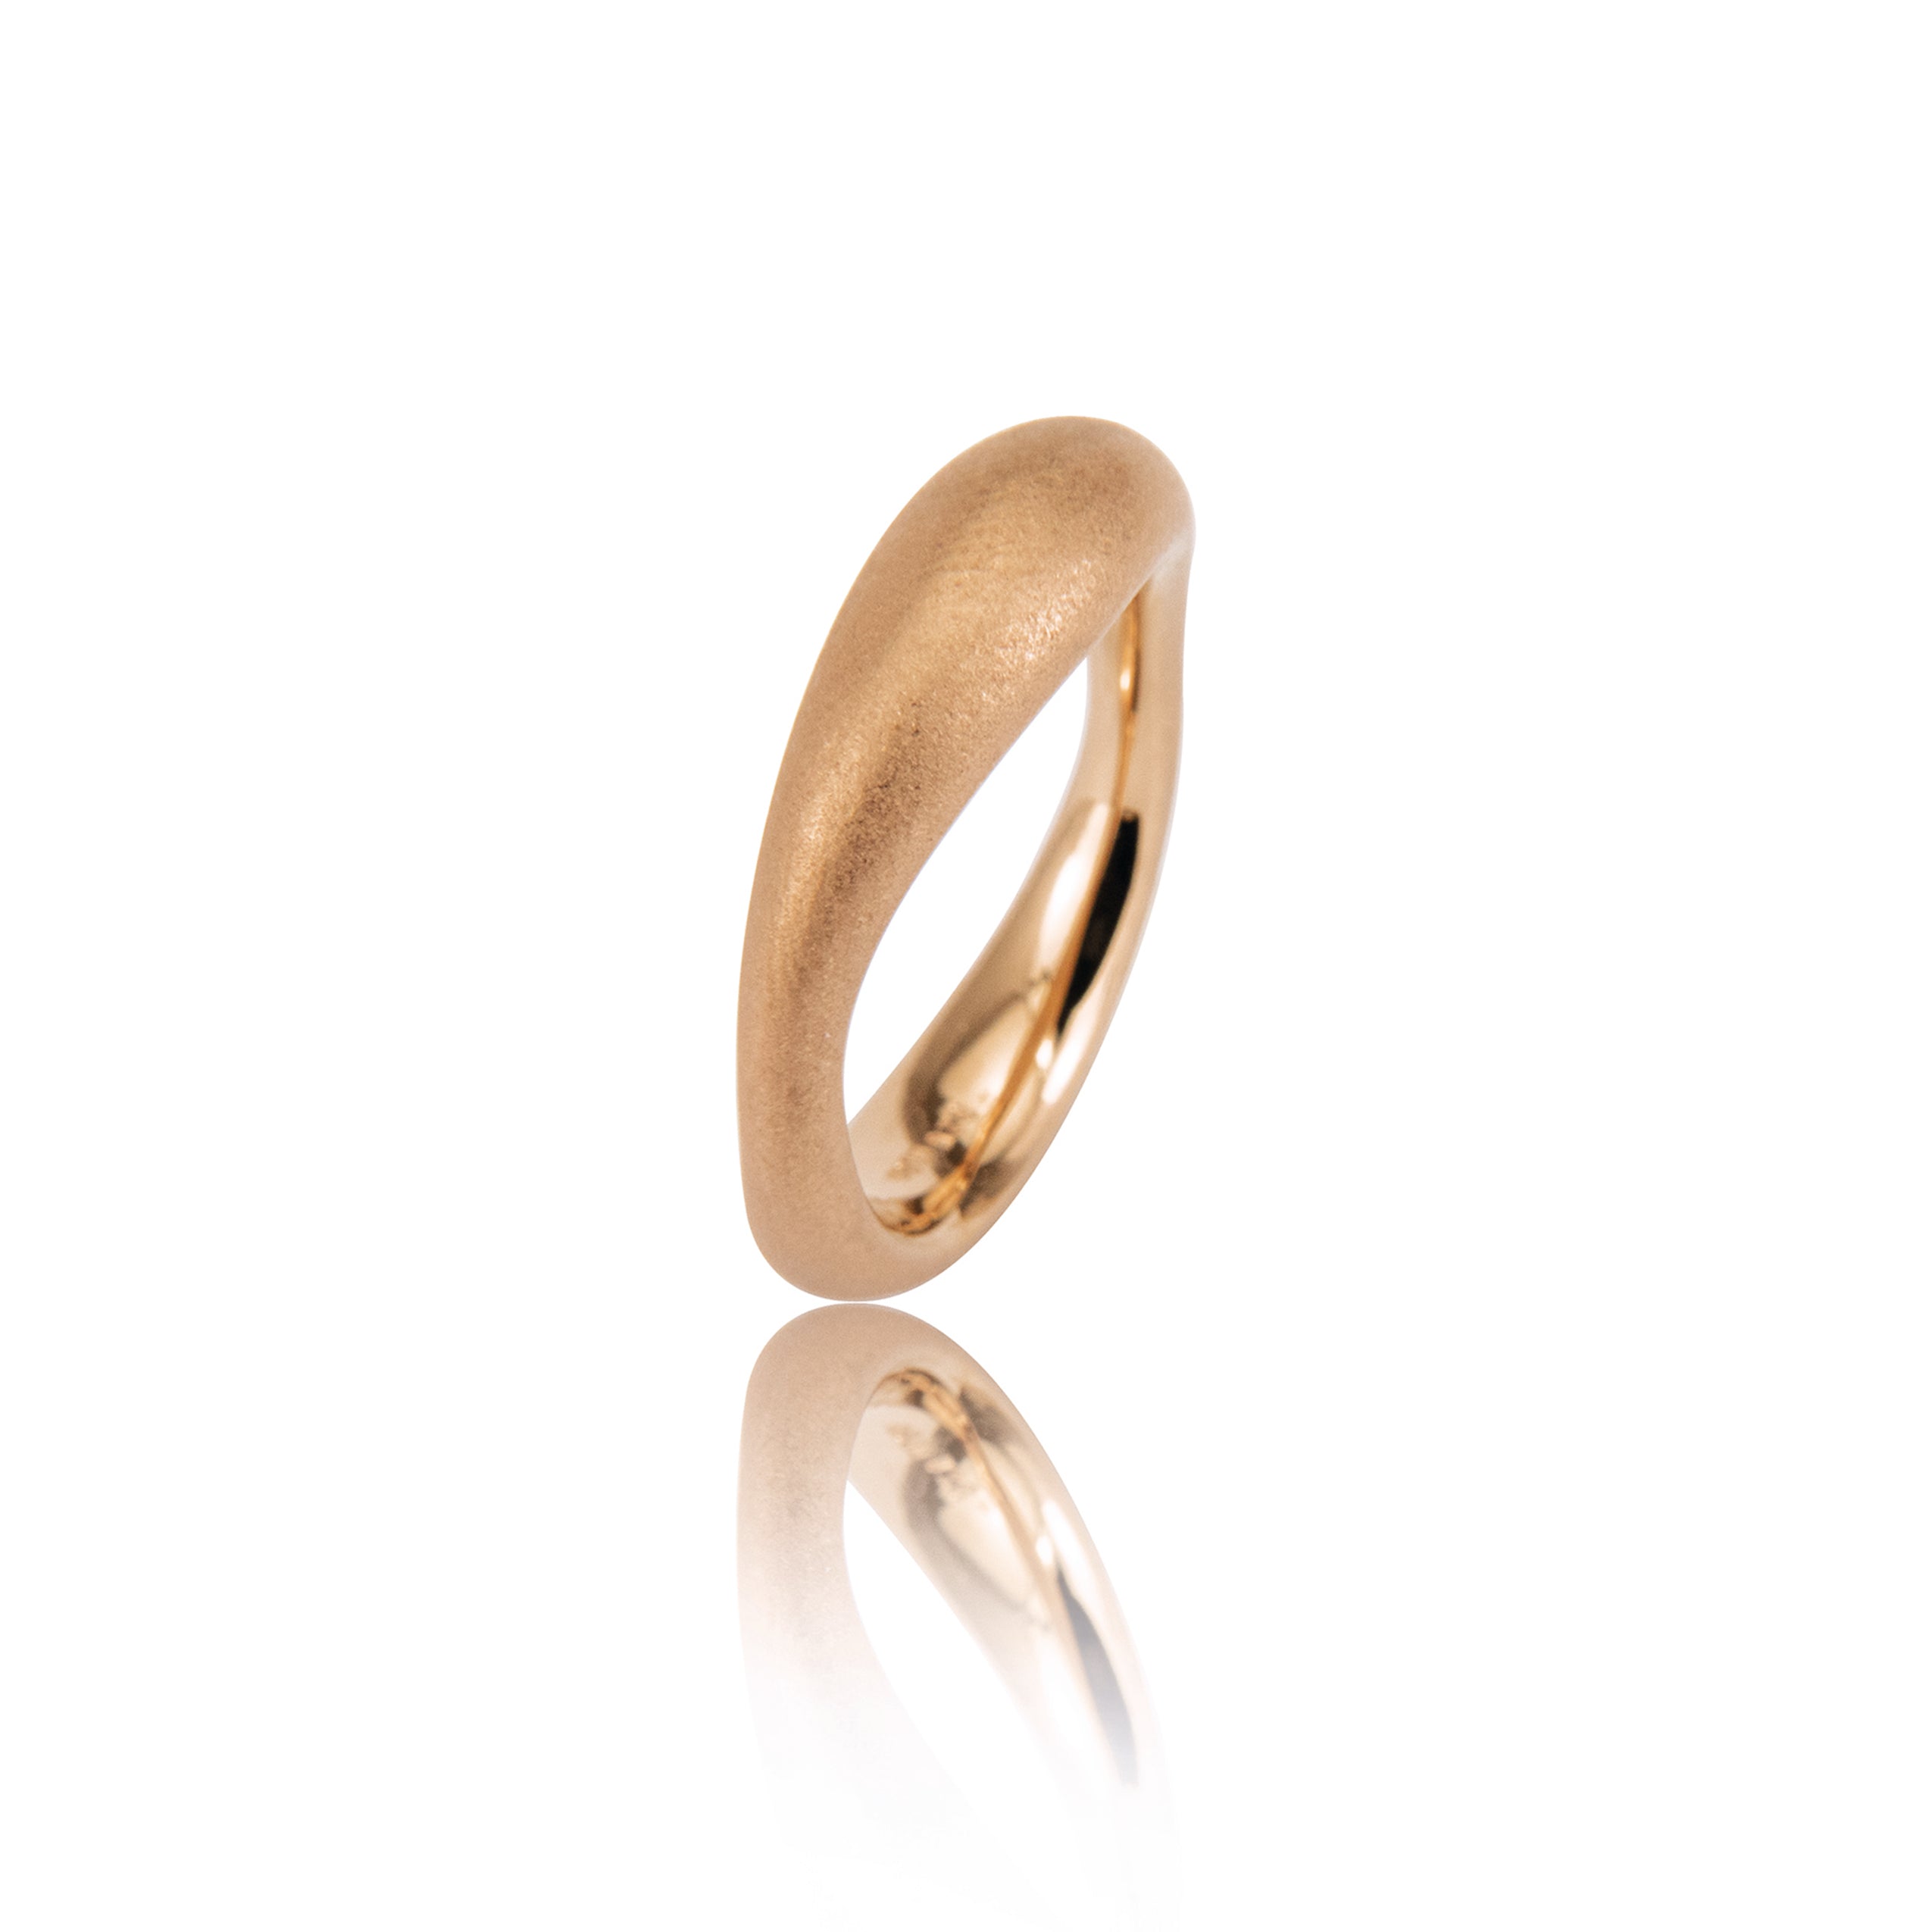 Closed ring "one" 925/-